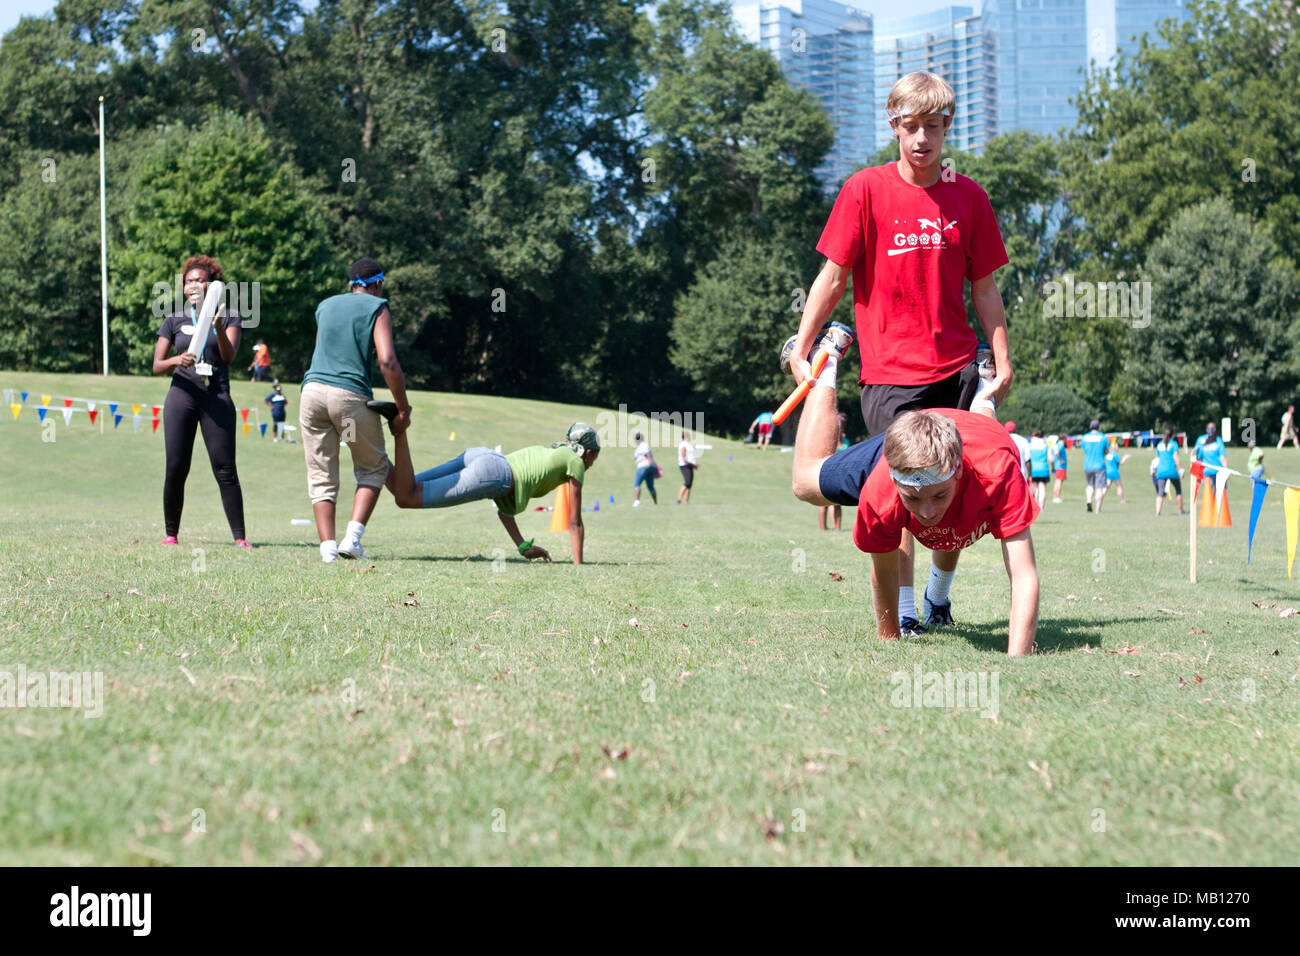 Two young men compete in the wheelbarrow race at A Day For Kids, a charity  event on September 7, 2013 in Atlanta, GA Stock Photo - Alamy